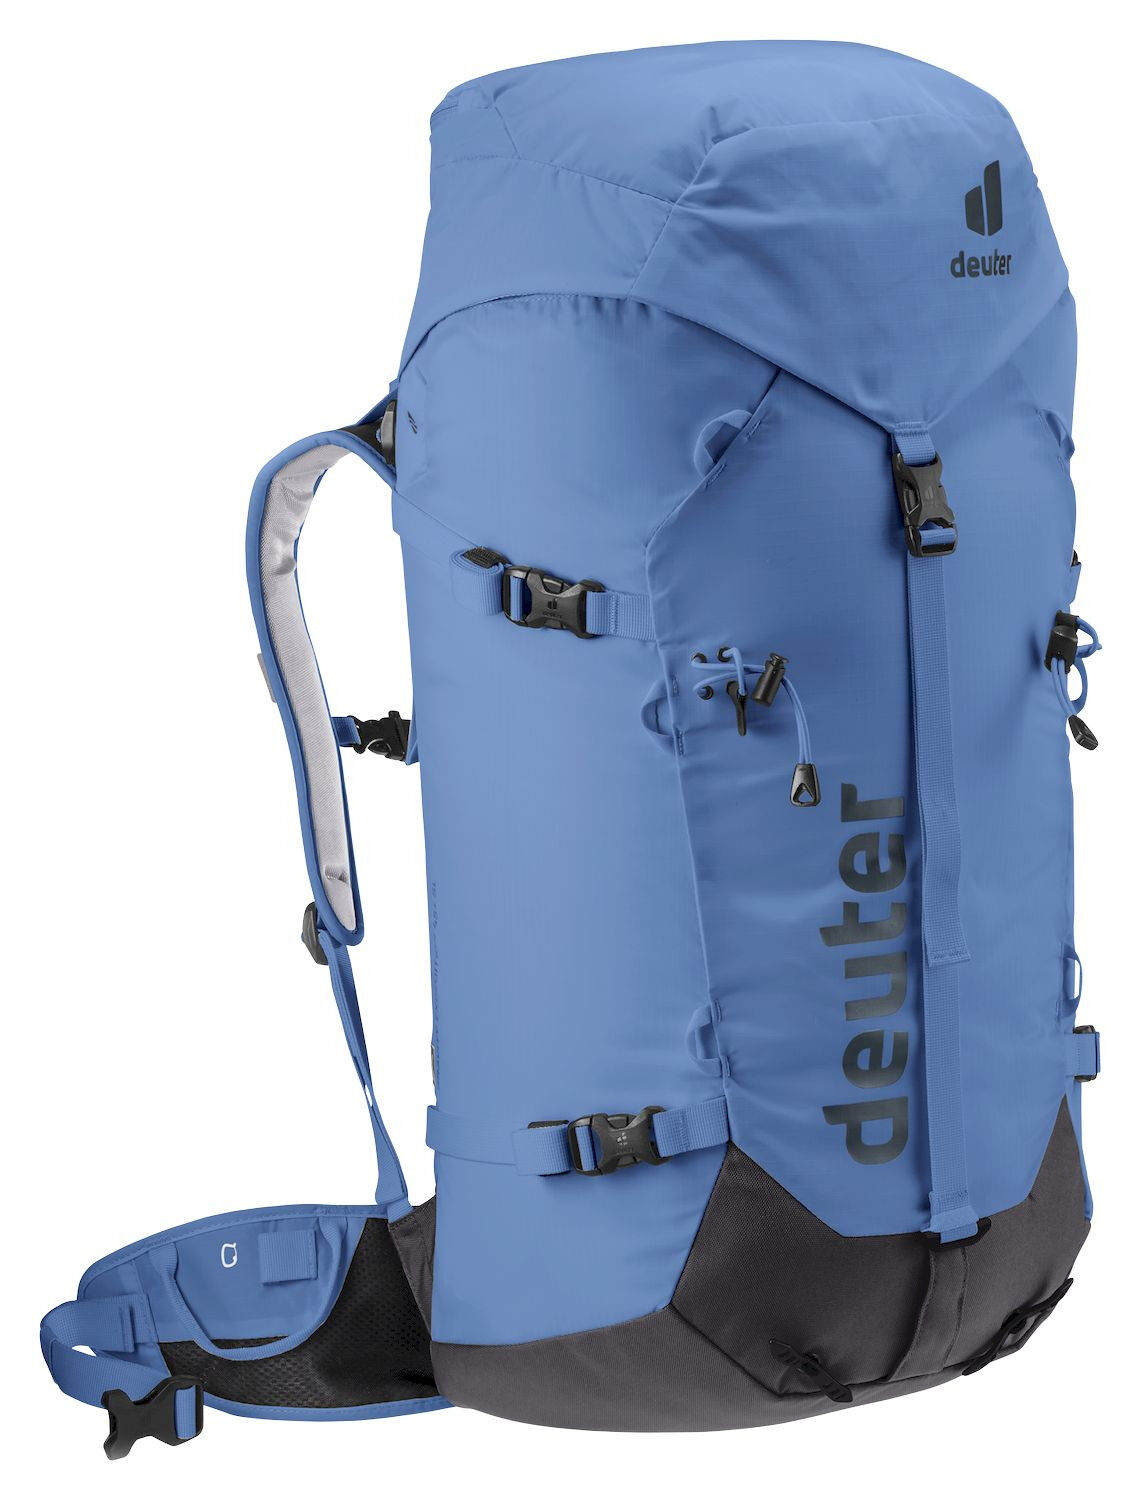 Deuter Gravity Expedition 45+ SL - Mountaineering backpack - Women's